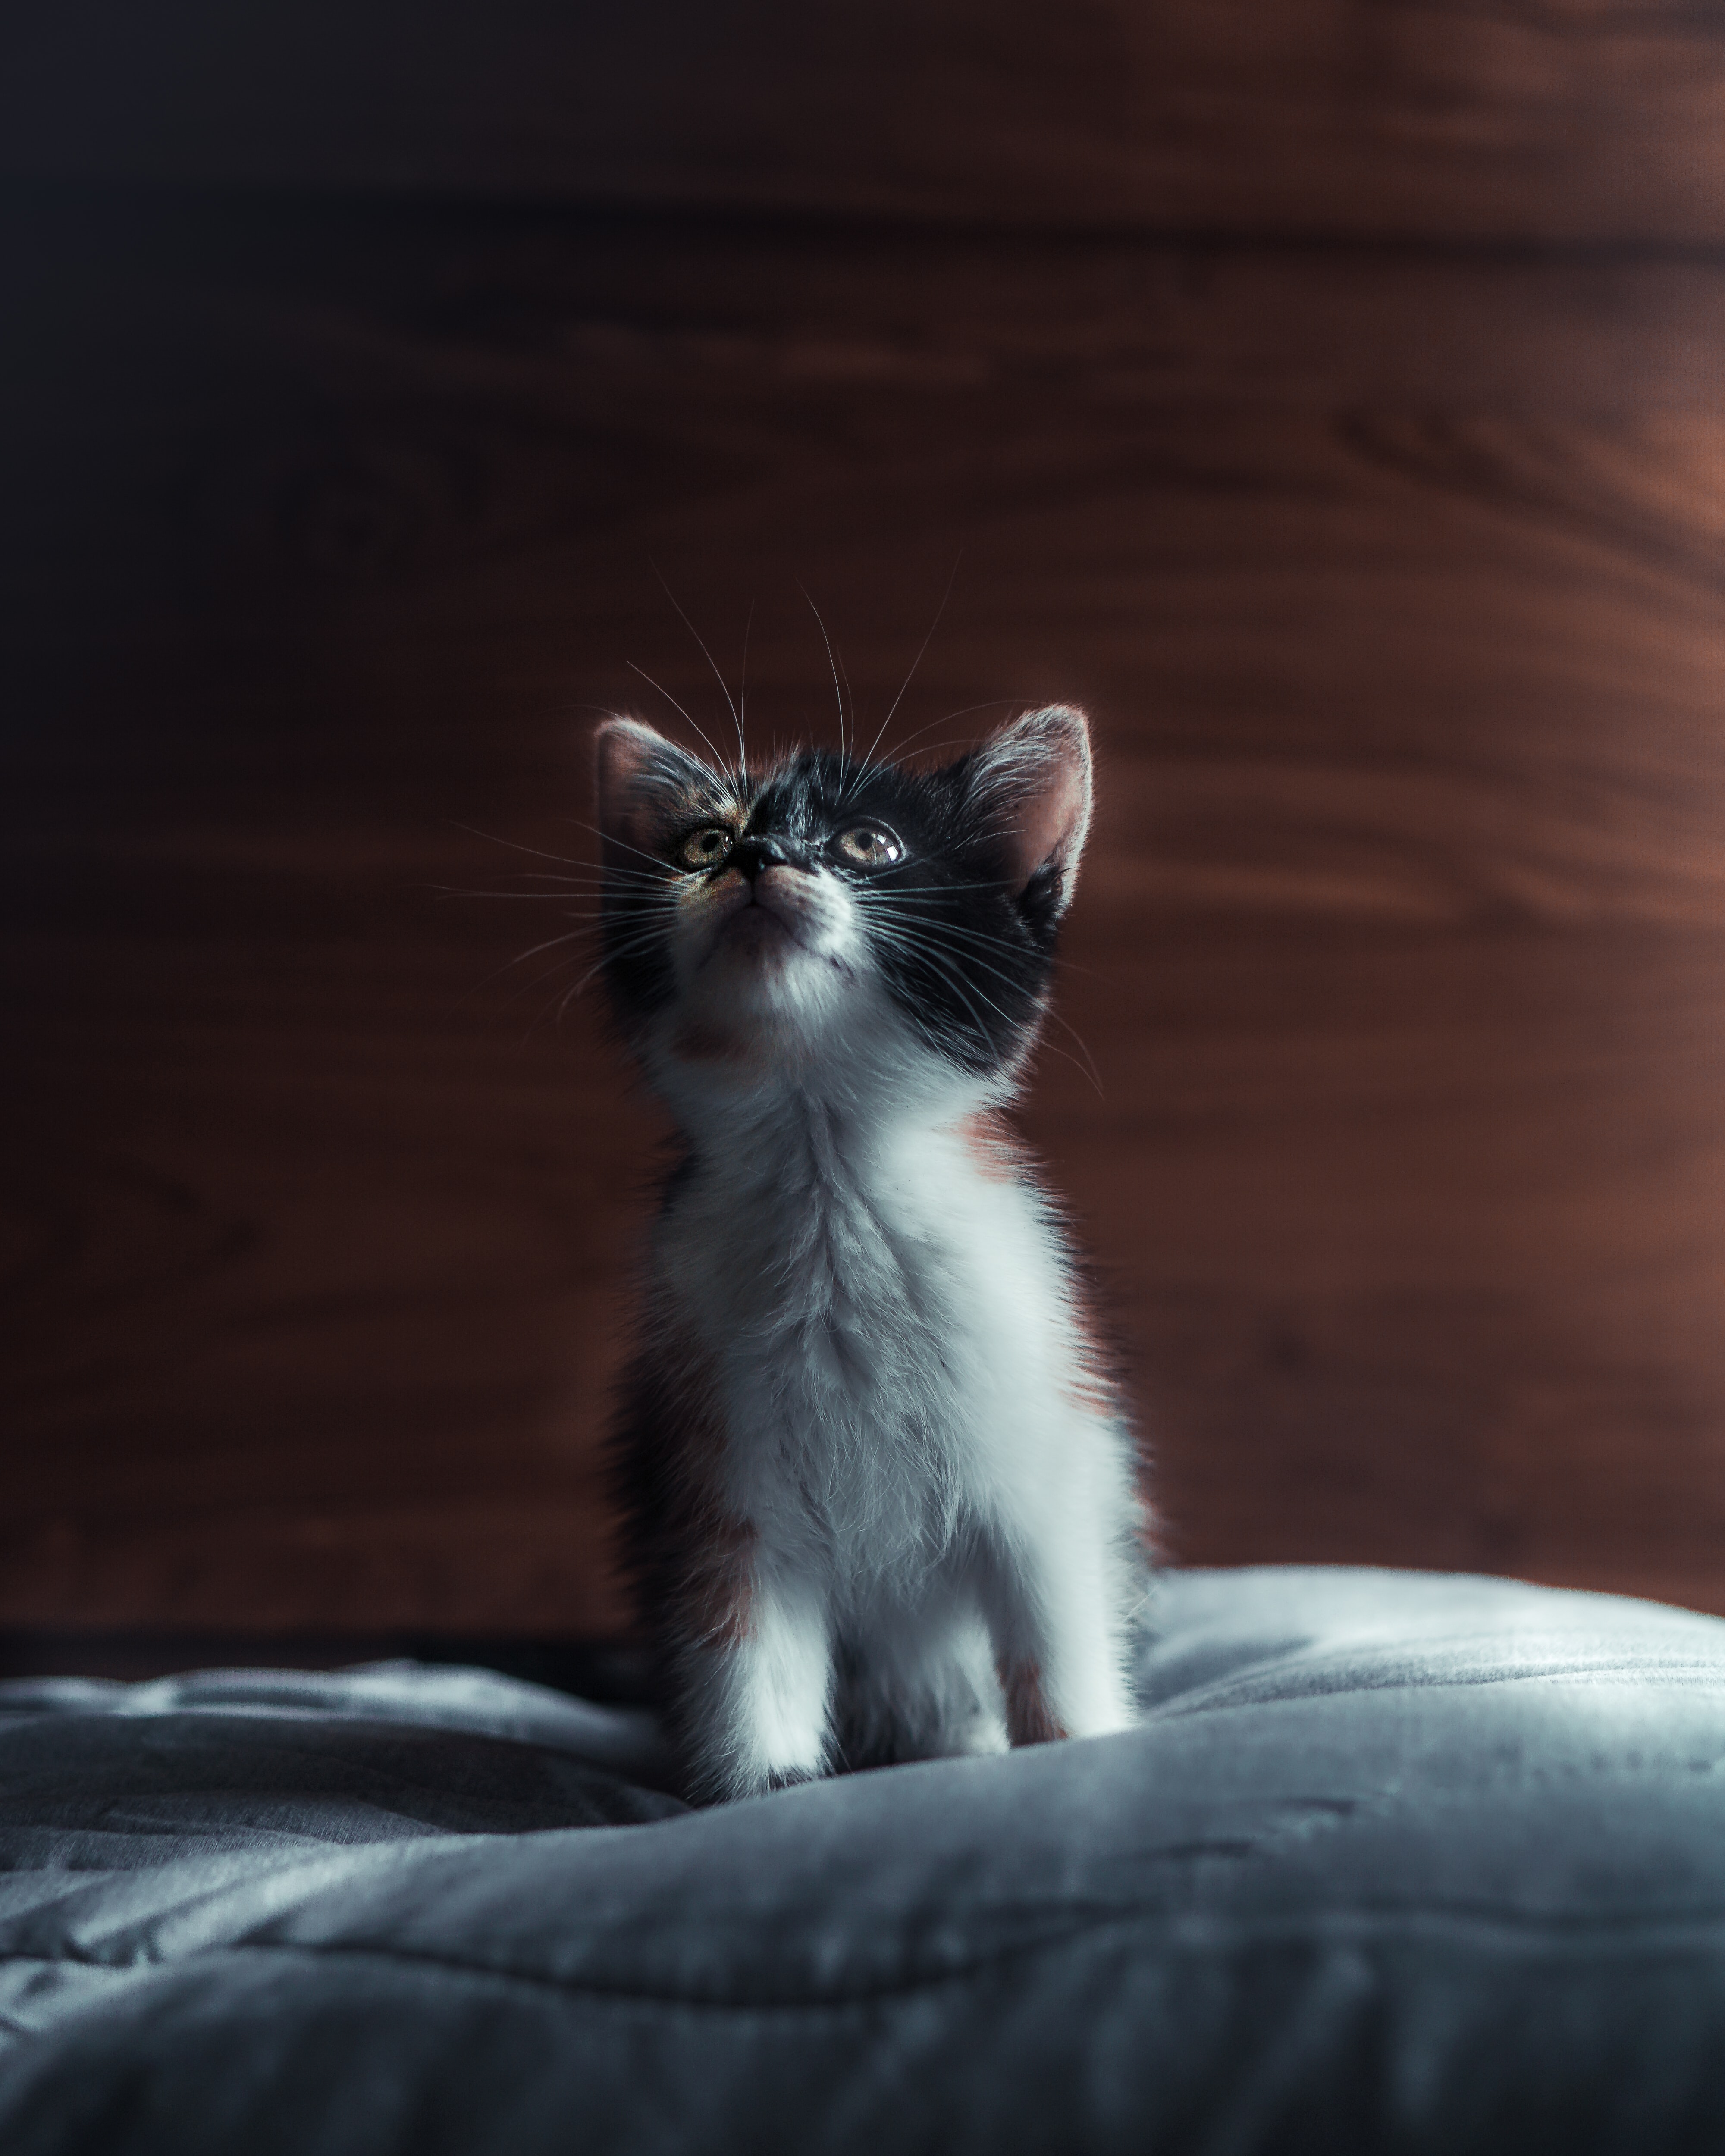 147999 3840x2160 PC pictures for free, download nice, kitty, cat, kitten 3840x2160 wallpapers on your desktop